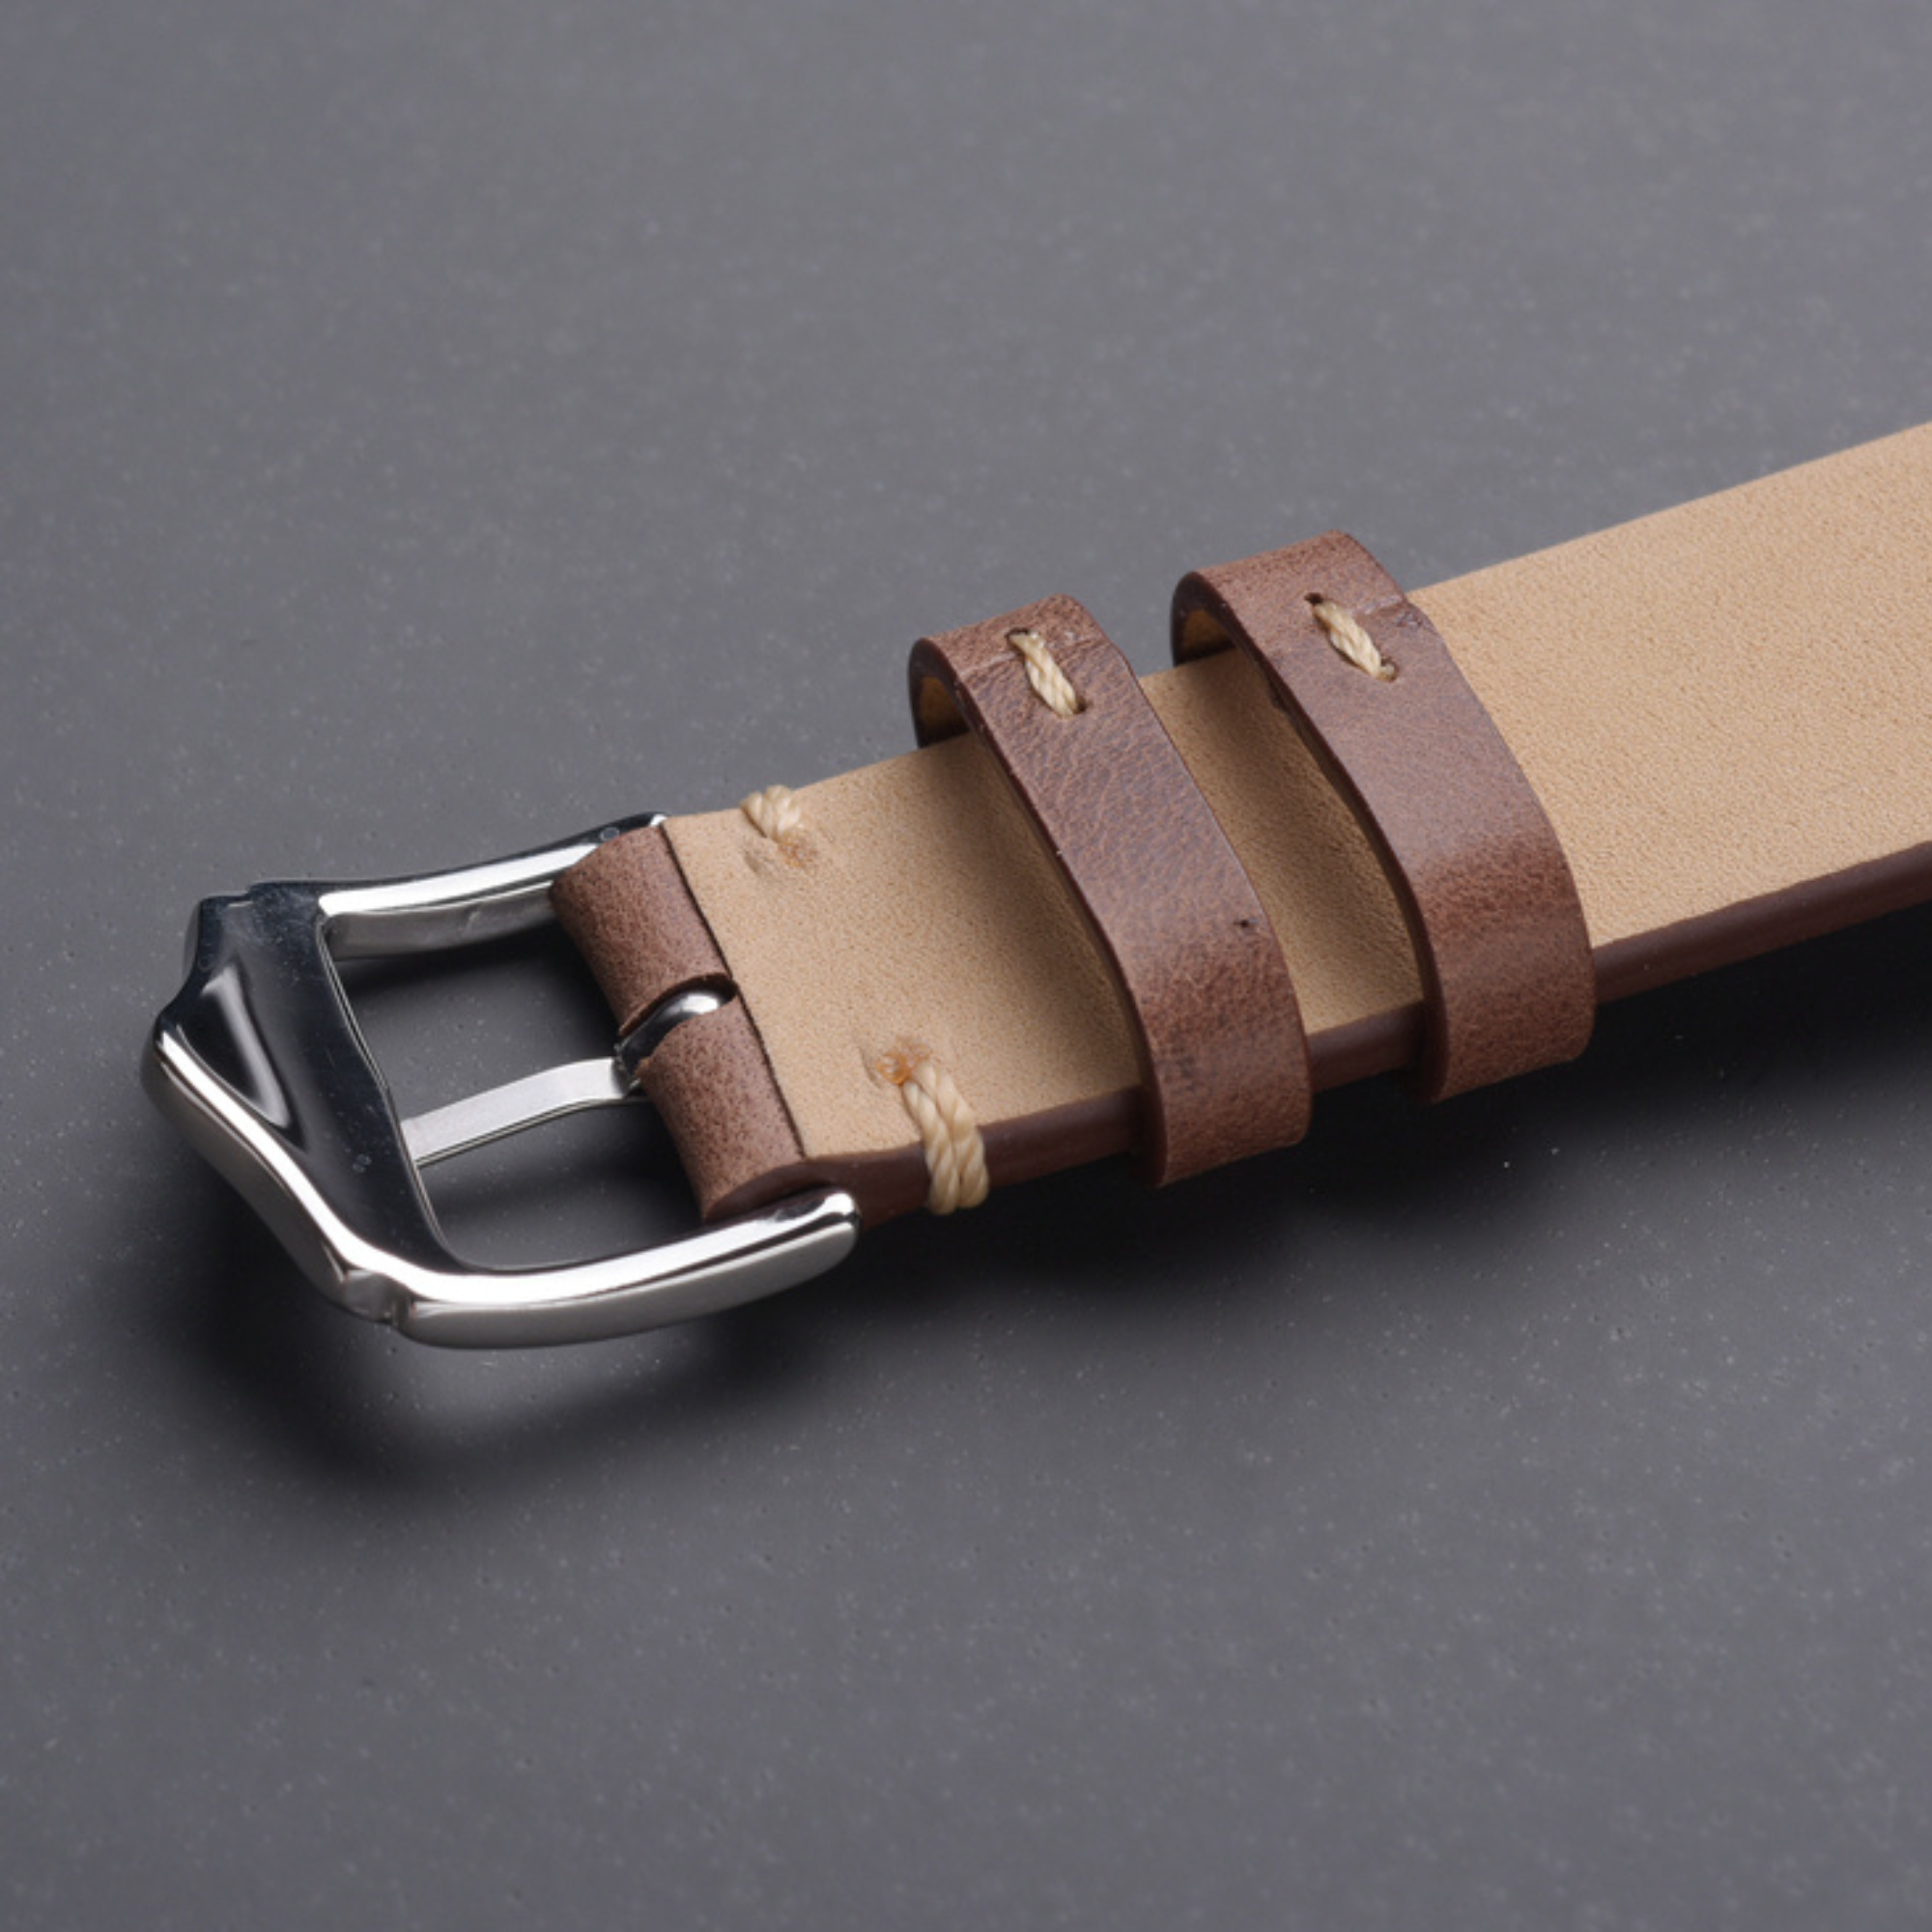 Genuine Leather Watch Strap Watchband Accessories 20mm - Coffee watch leather strap band india online dream watches